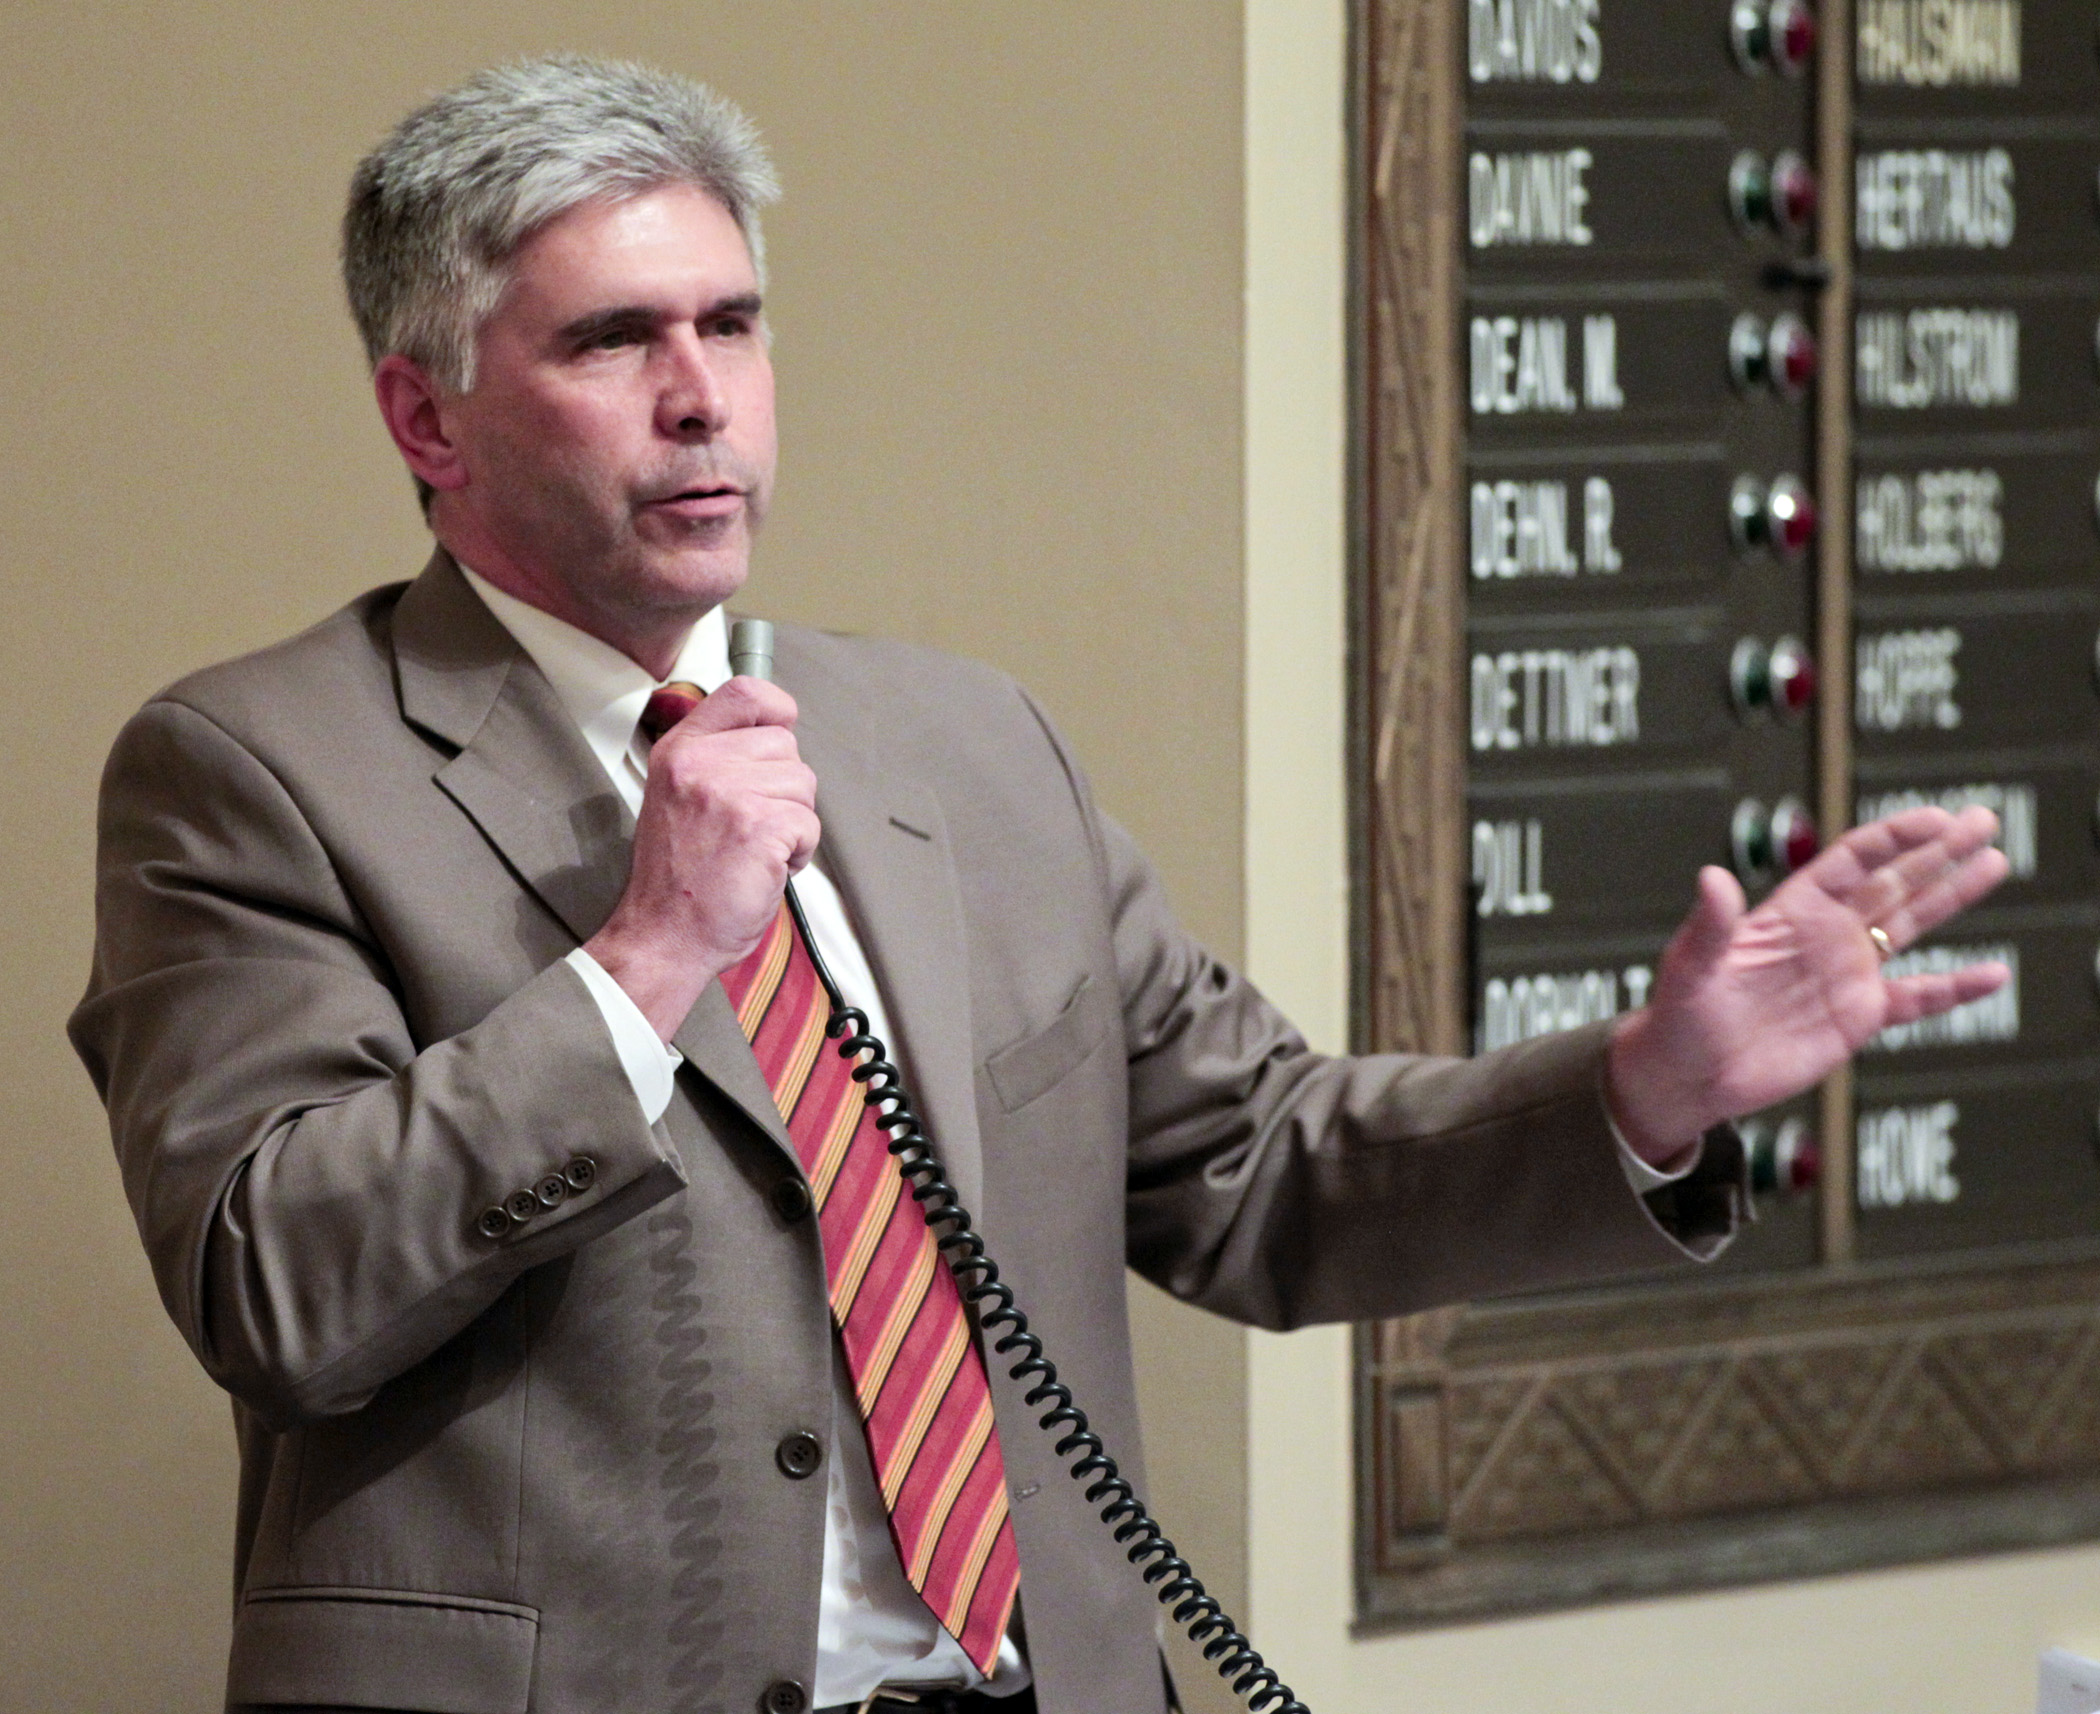 Rep. Joe Atkins makes closing comments on his bill, HF2293, which would regulate consumer short-term lenders during floor debate April 24. Photo by Paul Battaglia